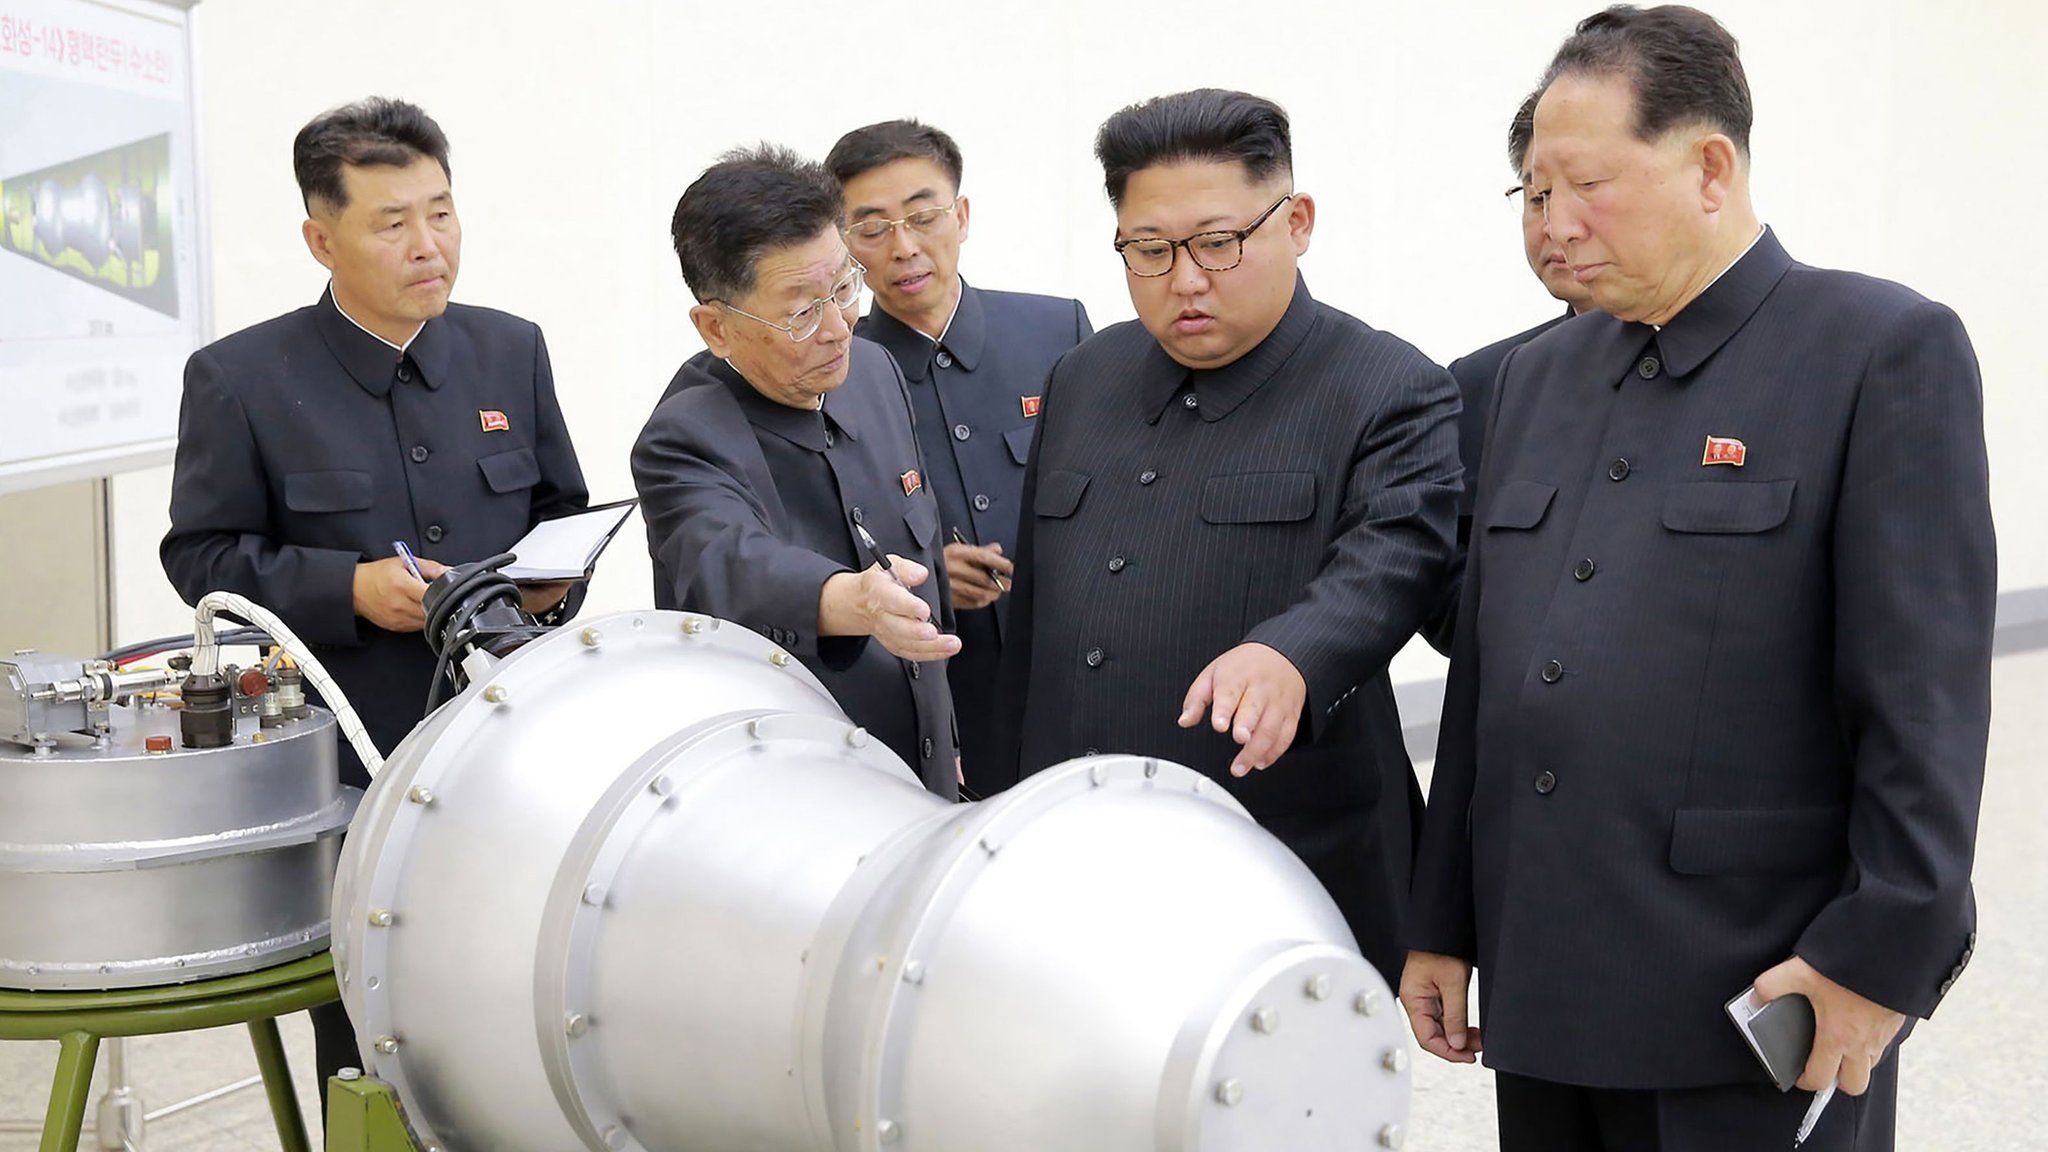 Undated handout photo of Kim Jong-un looking at military hardware, on 3 September 2017